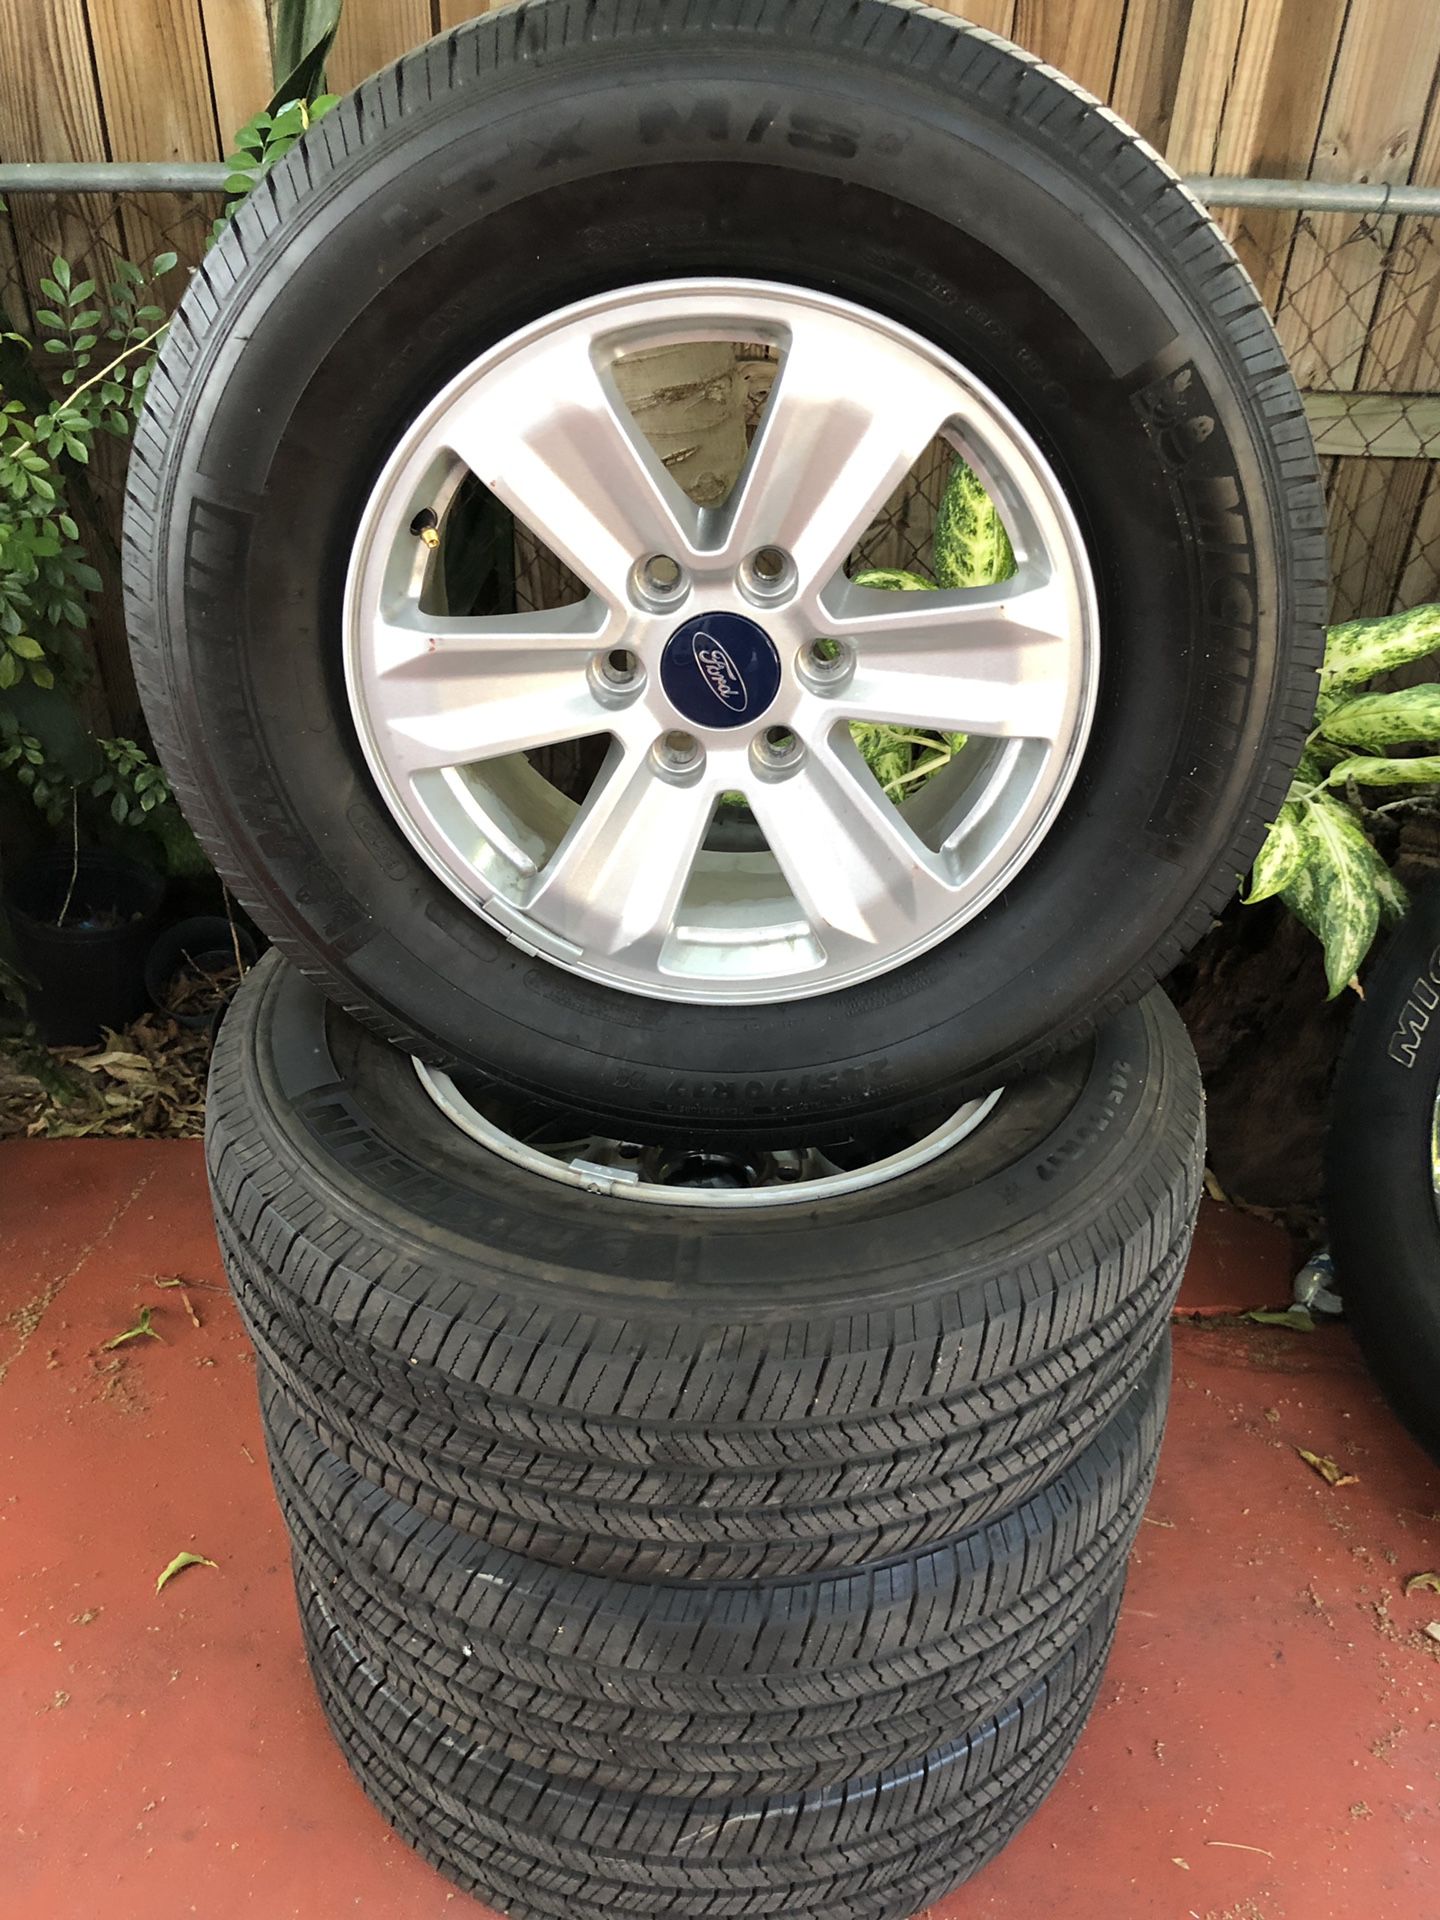 Ford F-150 Rims With Brand New Michelin Tires